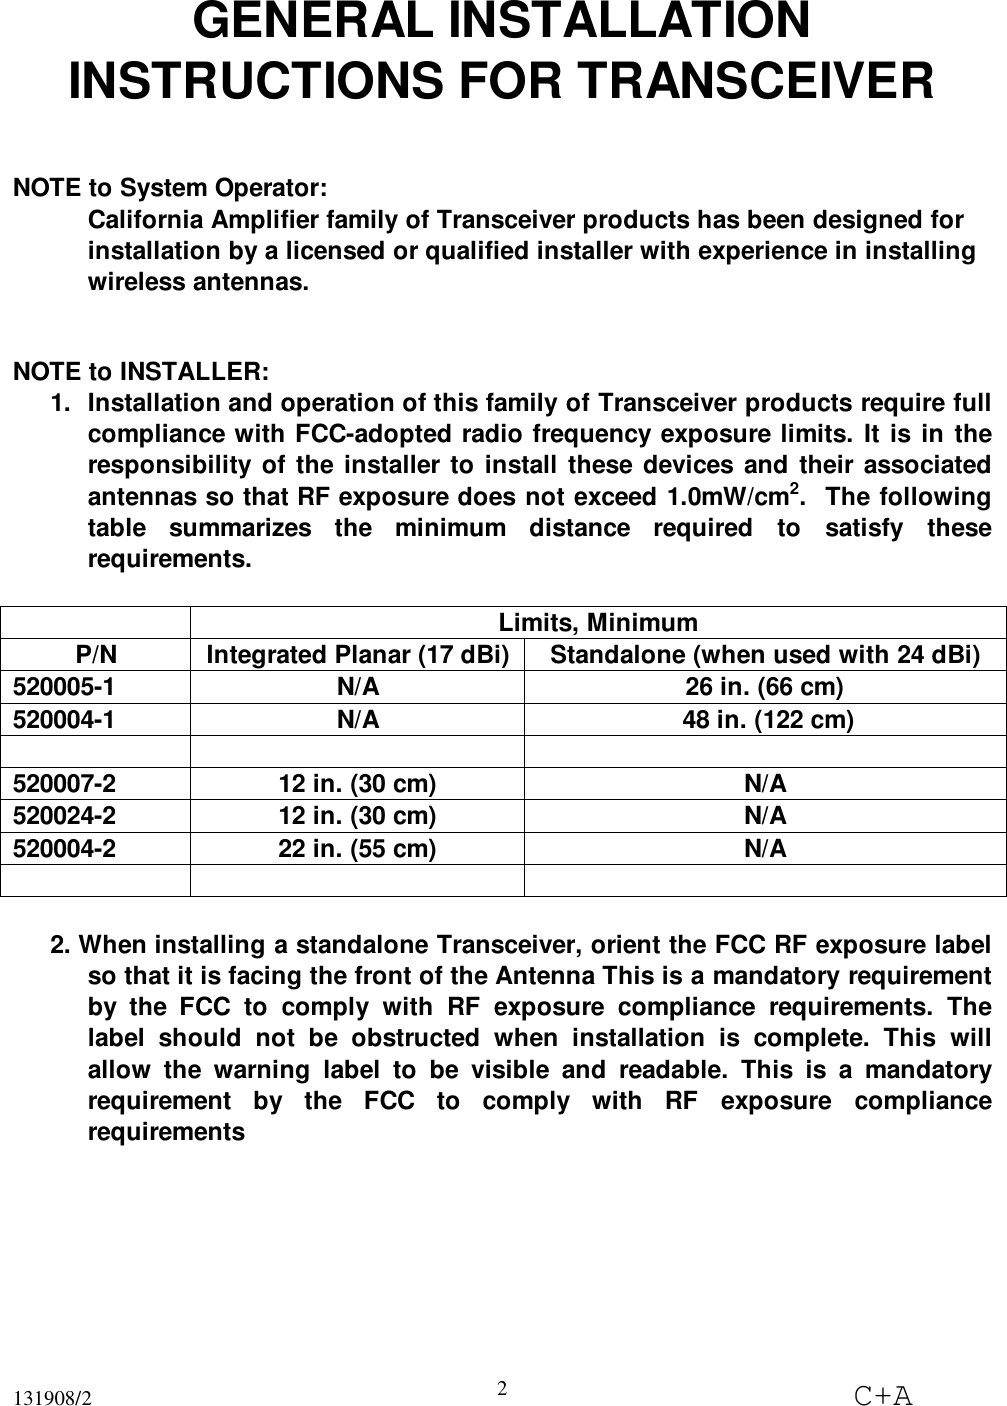 131908/2 C+A2GENERAL INSTALLATIONINSTRUCTIONS FOR TRANSCEIVERNOTE to System Operator:California Amplifier family of Transceiver products has been designed forinstallation by a licensed or qualified installer with experience in installingwireless antennas.NOTE to INSTALLER:1.  Installation and operation of this family of Transceiver products require fullcompliance with FCC-adopted radio frequency exposure limits. It is in theresponsibility of the installer to install these devices and their associatedantennas so that RF exposure does not exceed 1.0mW/cm2.  The followingtable summarizes the minimum distance required to satisfy theserequirements.Limits, MinimumP/N Integrated Planar (17 dBi) Standalone (when used with 24 dBi)520005-1 N/A 26 in. (66 cm)520004-1 N/A  48 in. (122 cm)520007-2 12 in. (30 cm) N/A520024-2 12 in. (30 cm) N/A520004-2 22 in. (55 cm) N/A2. When installing a standalone Transceiver, orient the FCC RF exposure labelso that it is facing the front of the Antenna This is a mandatory requirementby the FCC to comply with RF exposure compliance requirements. Thelabel should not be obstructed when installation is complete. This willallow the warning label to be visible and readable. This is a mandatoryrequirement by the FCC to comply with RF exposure compliancerequirements